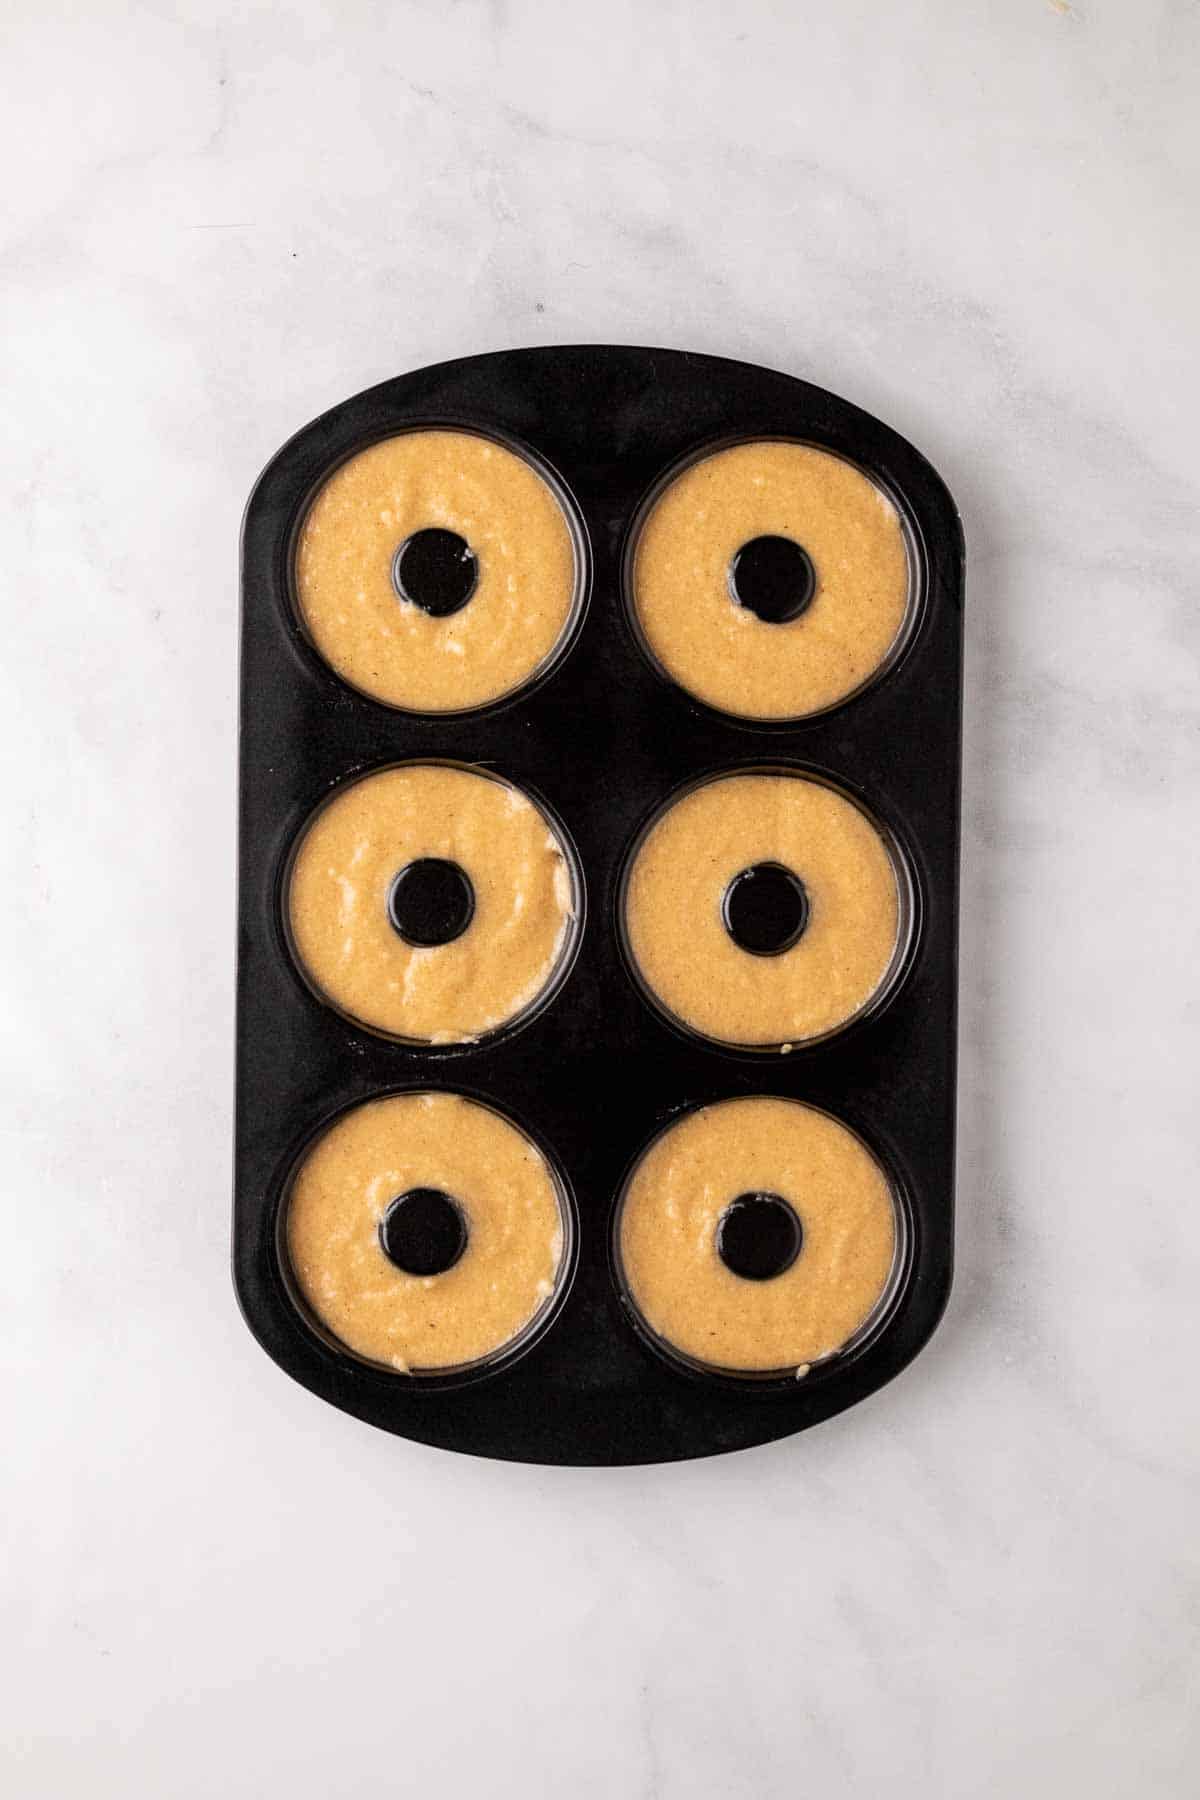 Donut batter in a donut pan, ready to bake